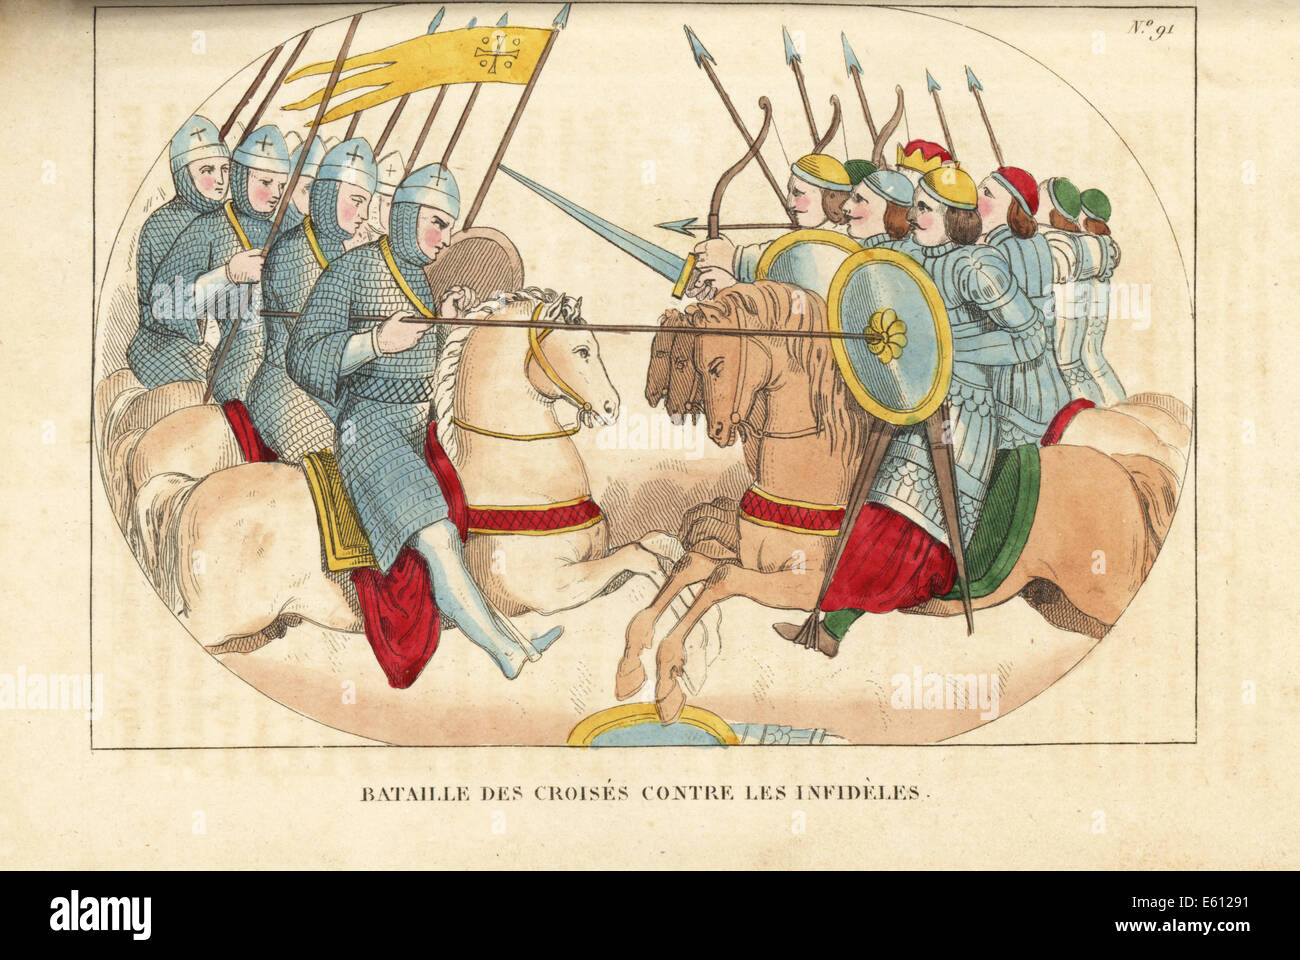 Cavalry battle between crusaders and infidels, 12th century. Stock Photo